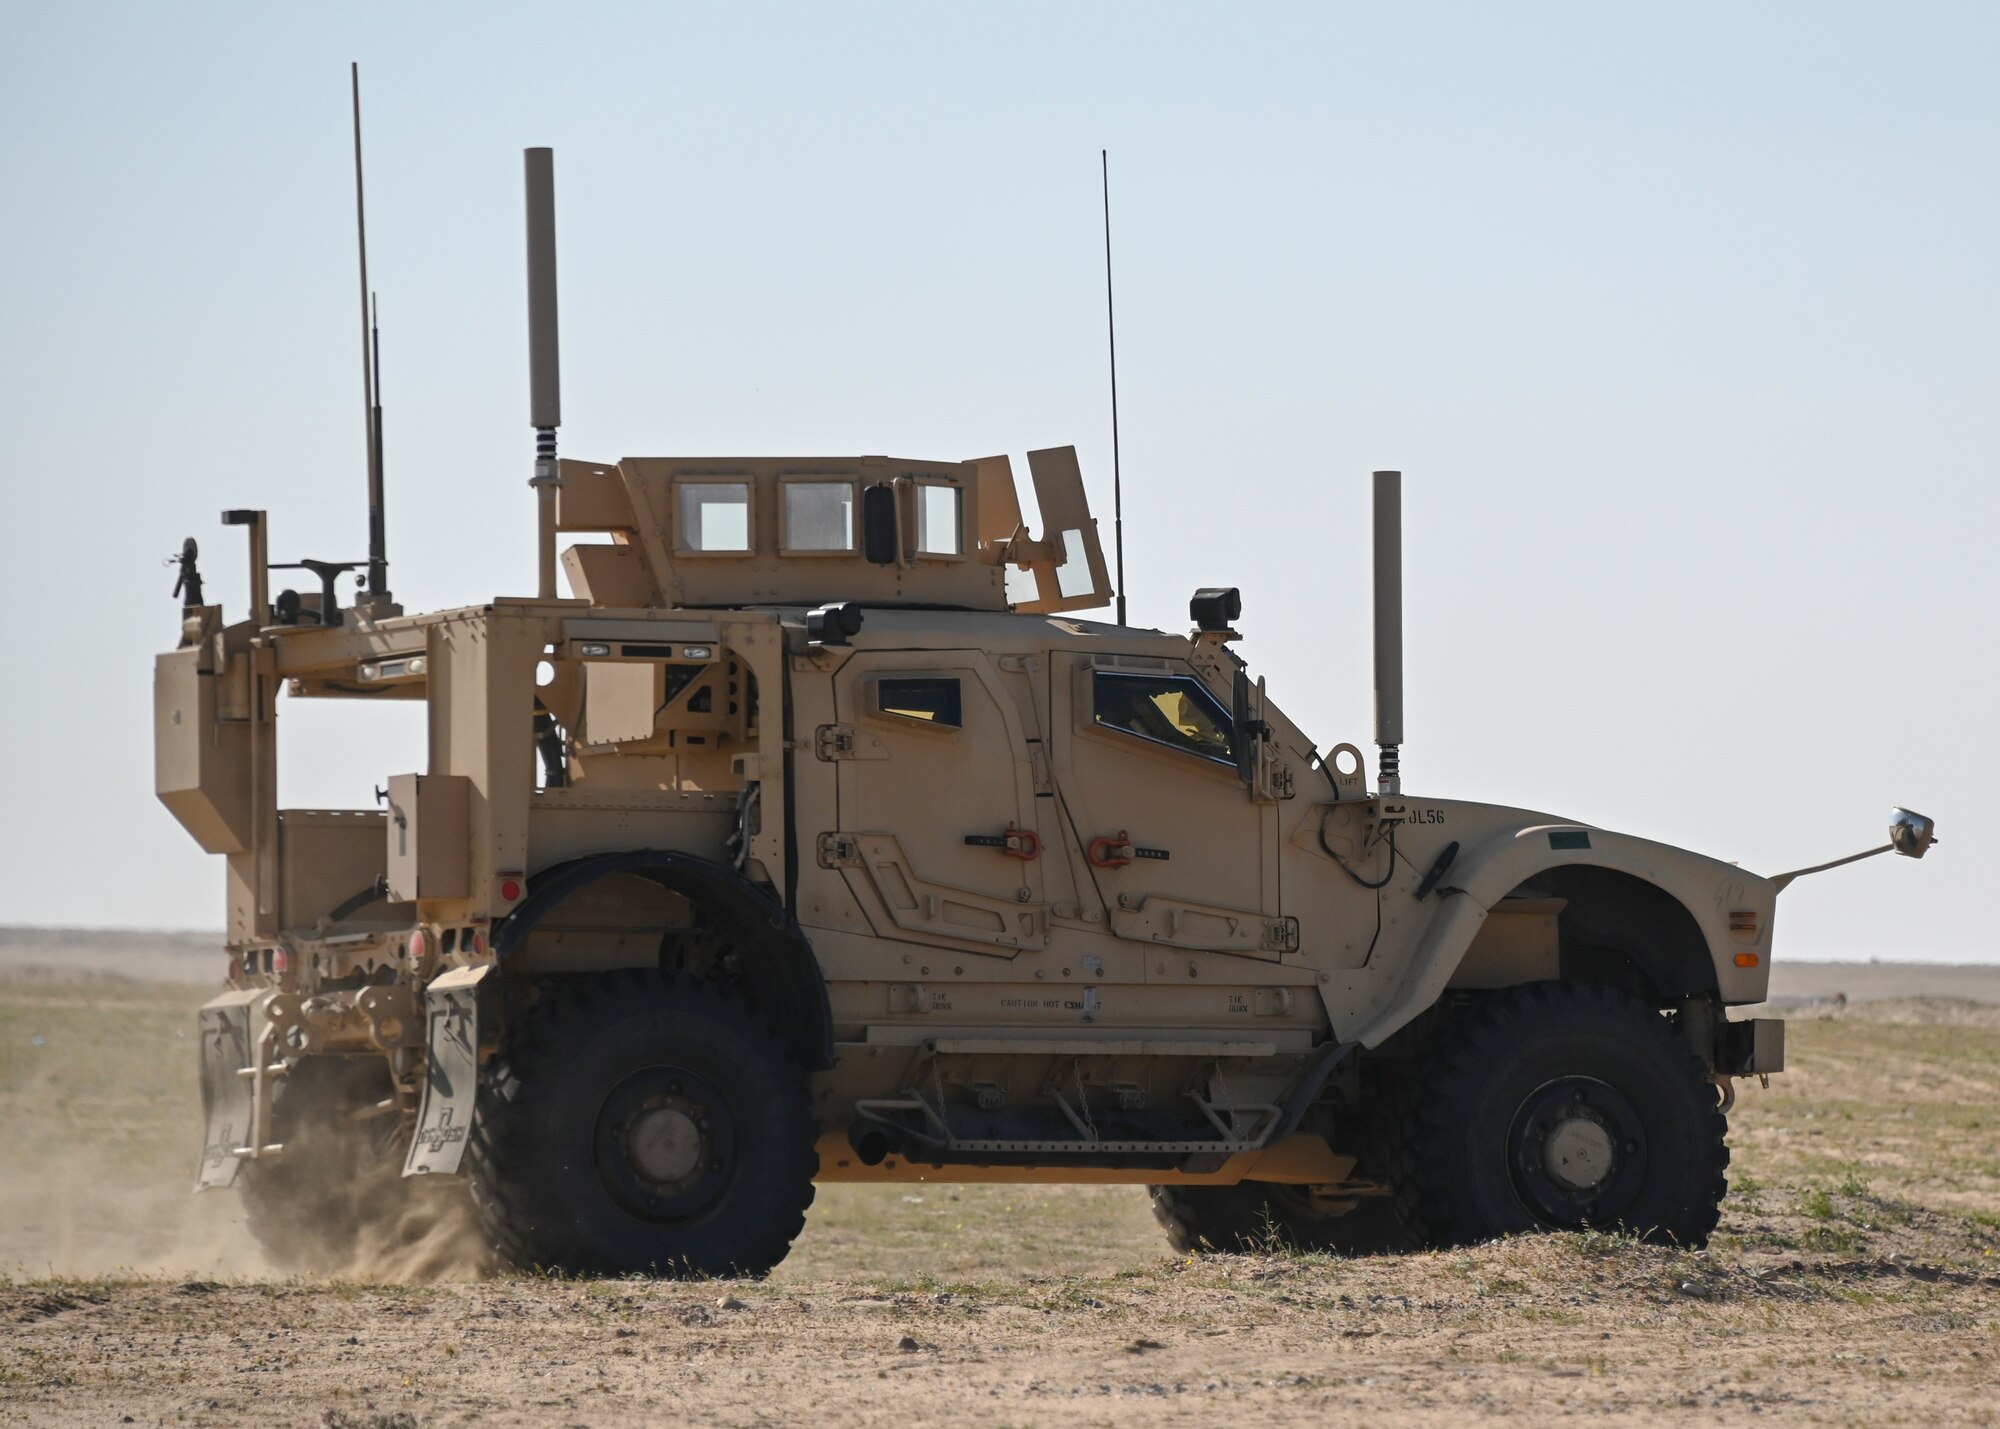 A photo of a Humvee driving in the desert